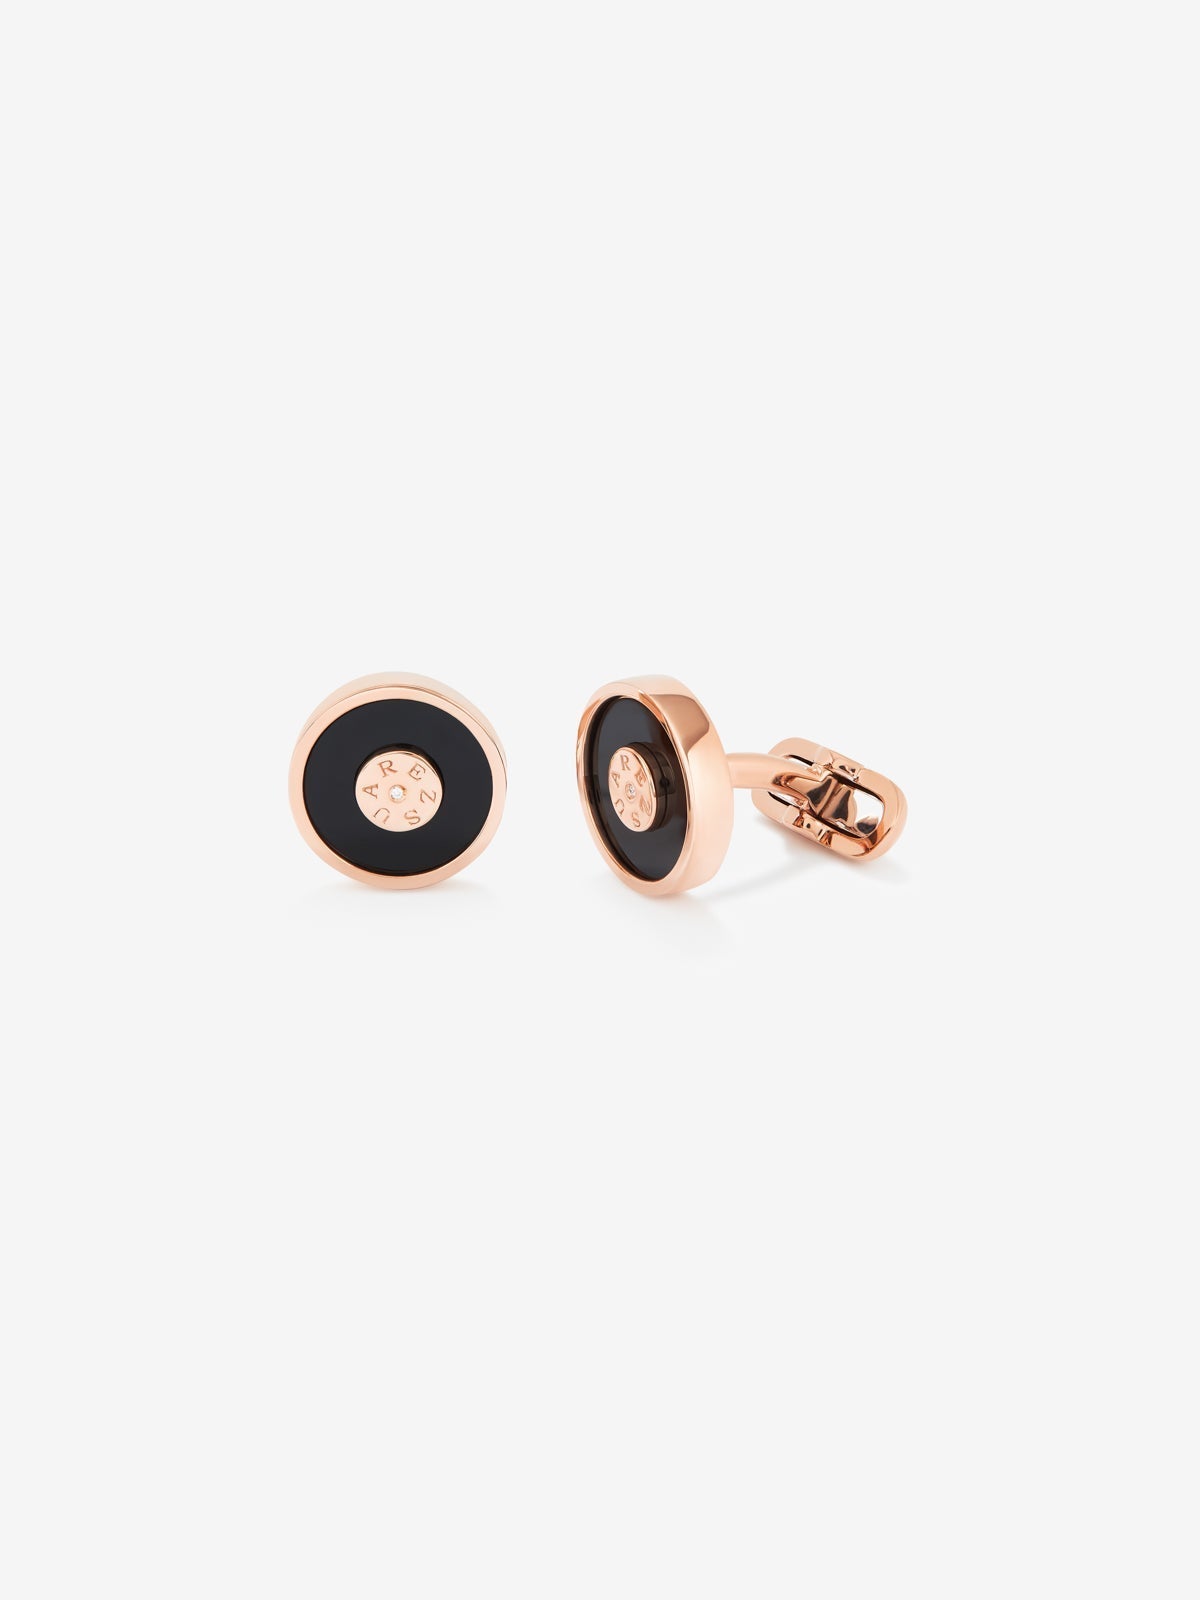 18K rose gold cufflinks with black onyx and 2 brilliant-cut diamonds with a total of 0.006 cts